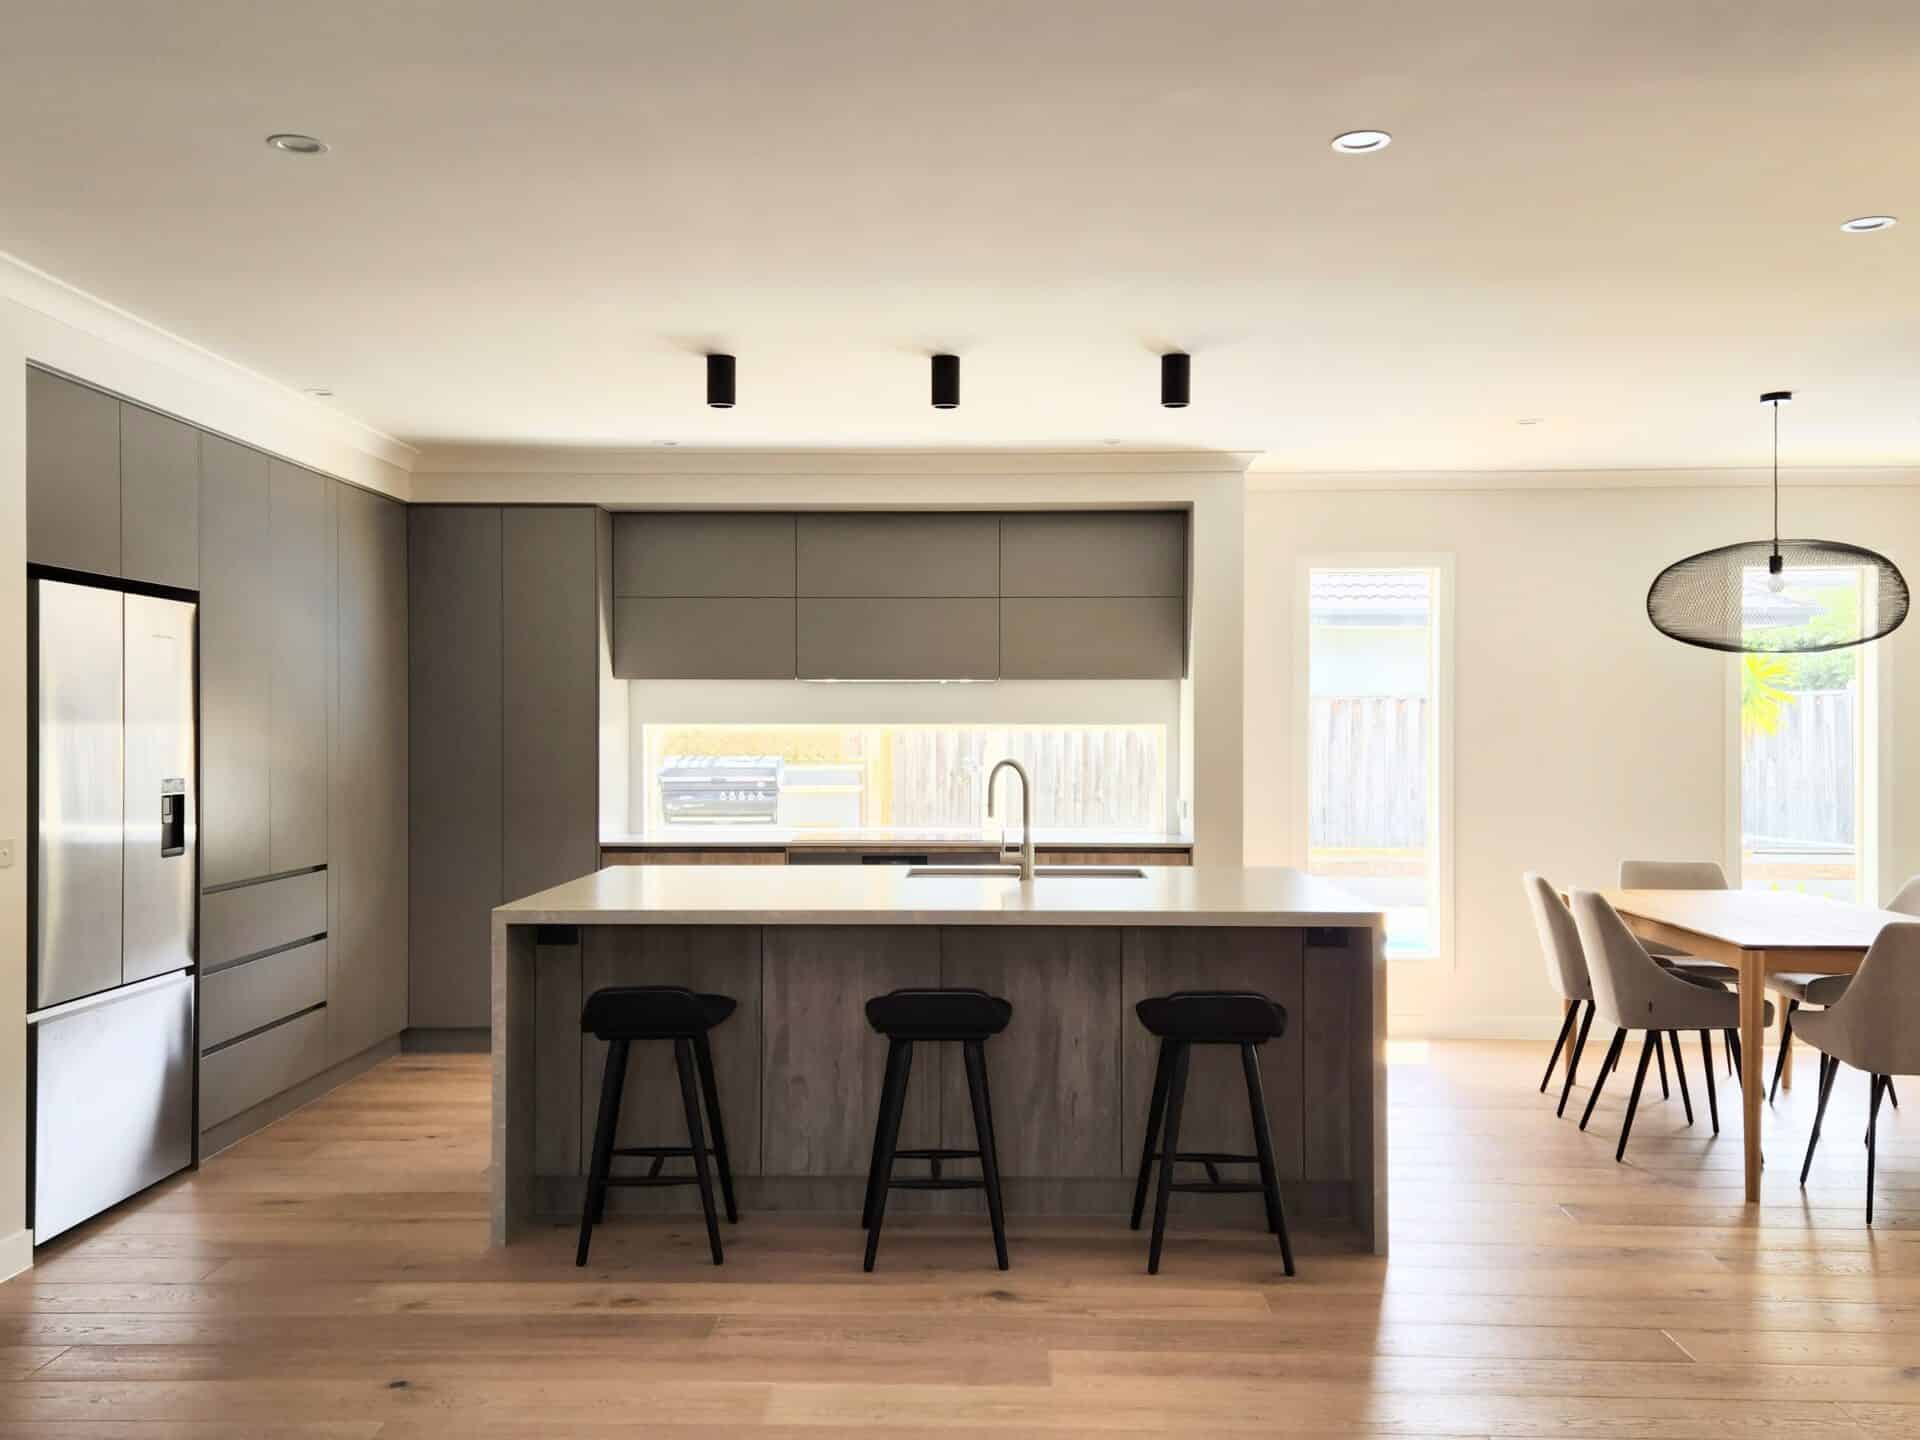 a modern kitchen and dining area with wooden flooring, stools and furniture.